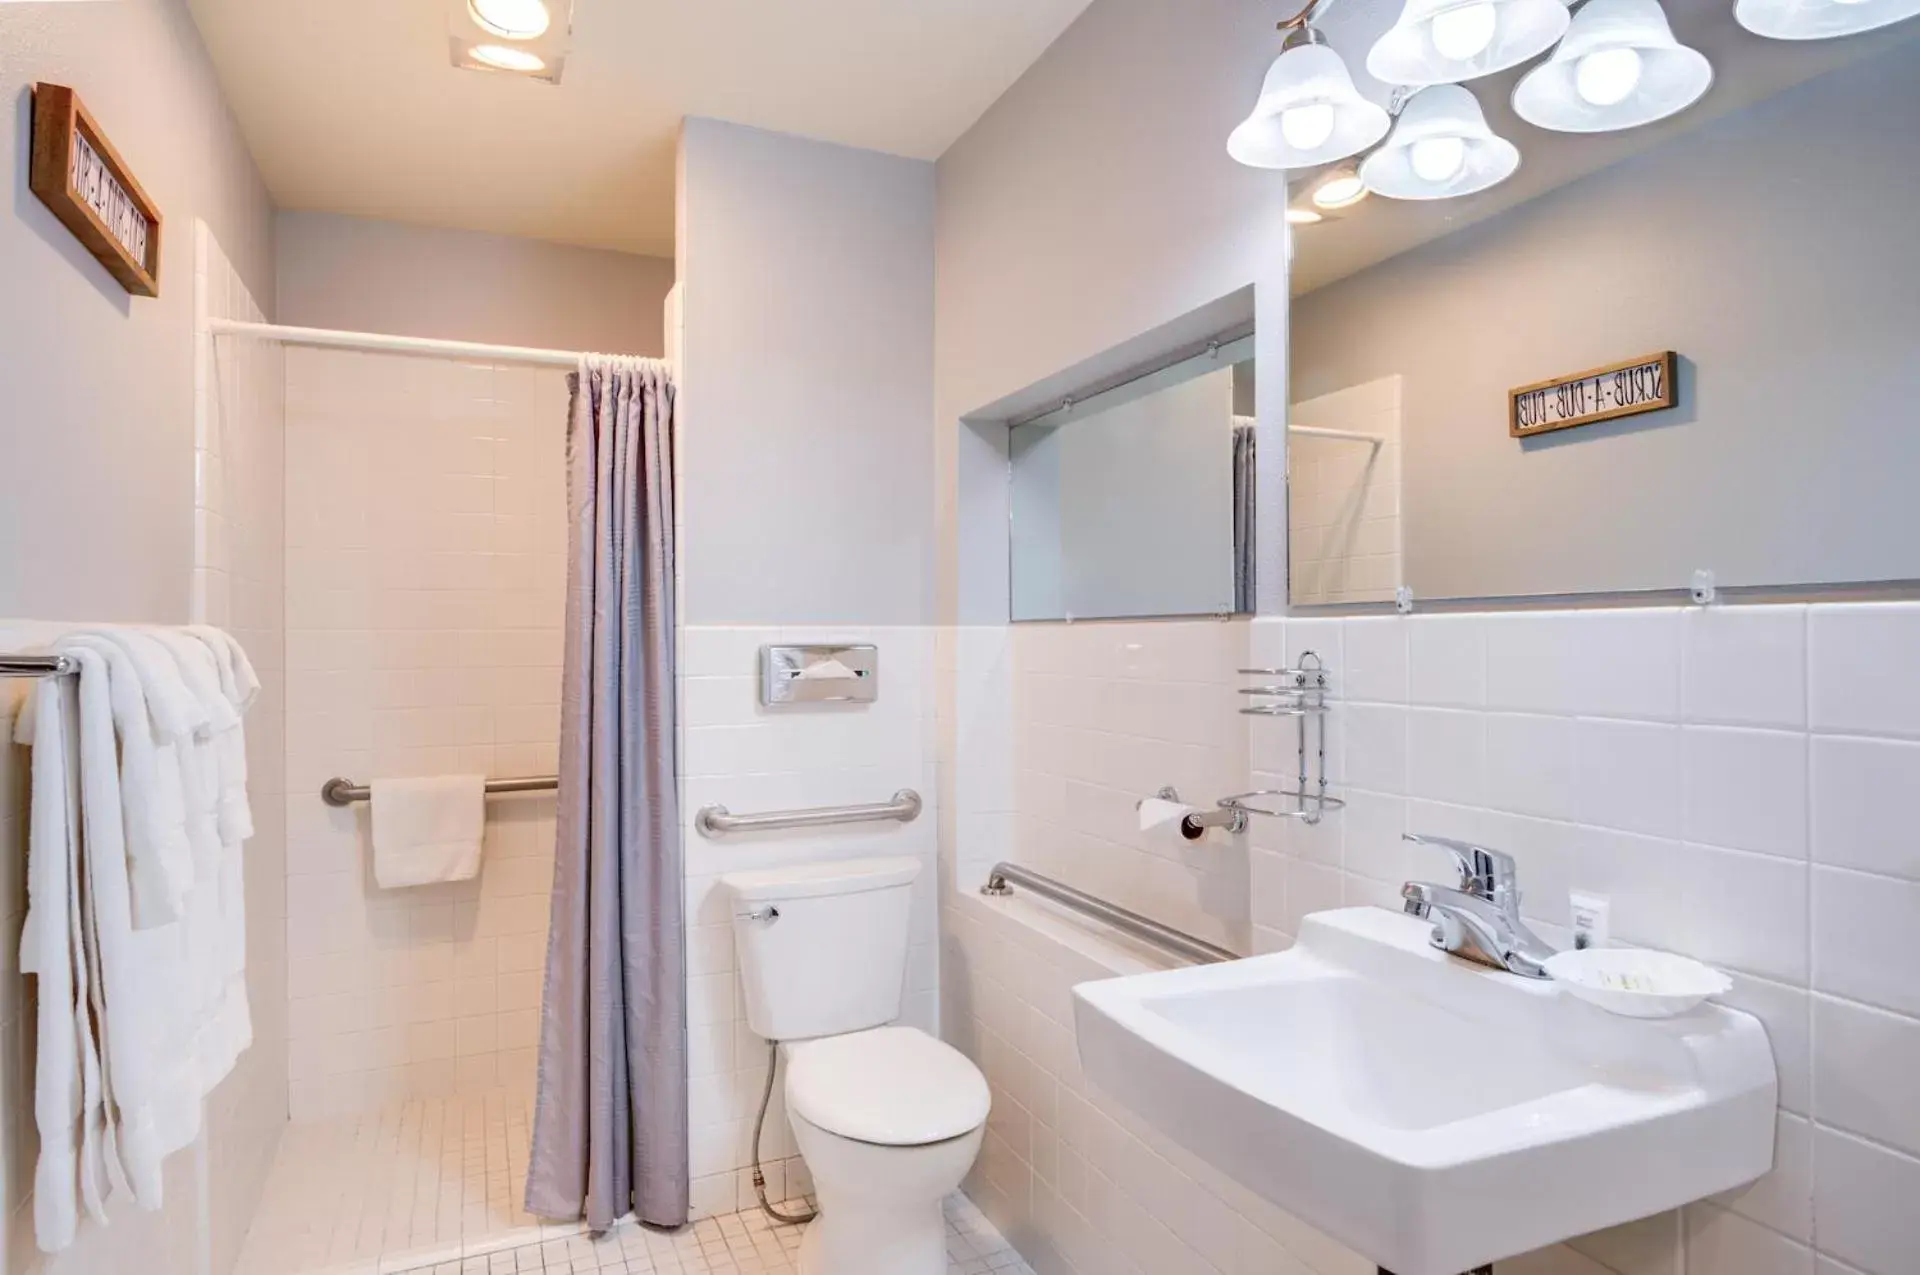 Facility for disabled guests, Bathroom in Bend Riverside Condos